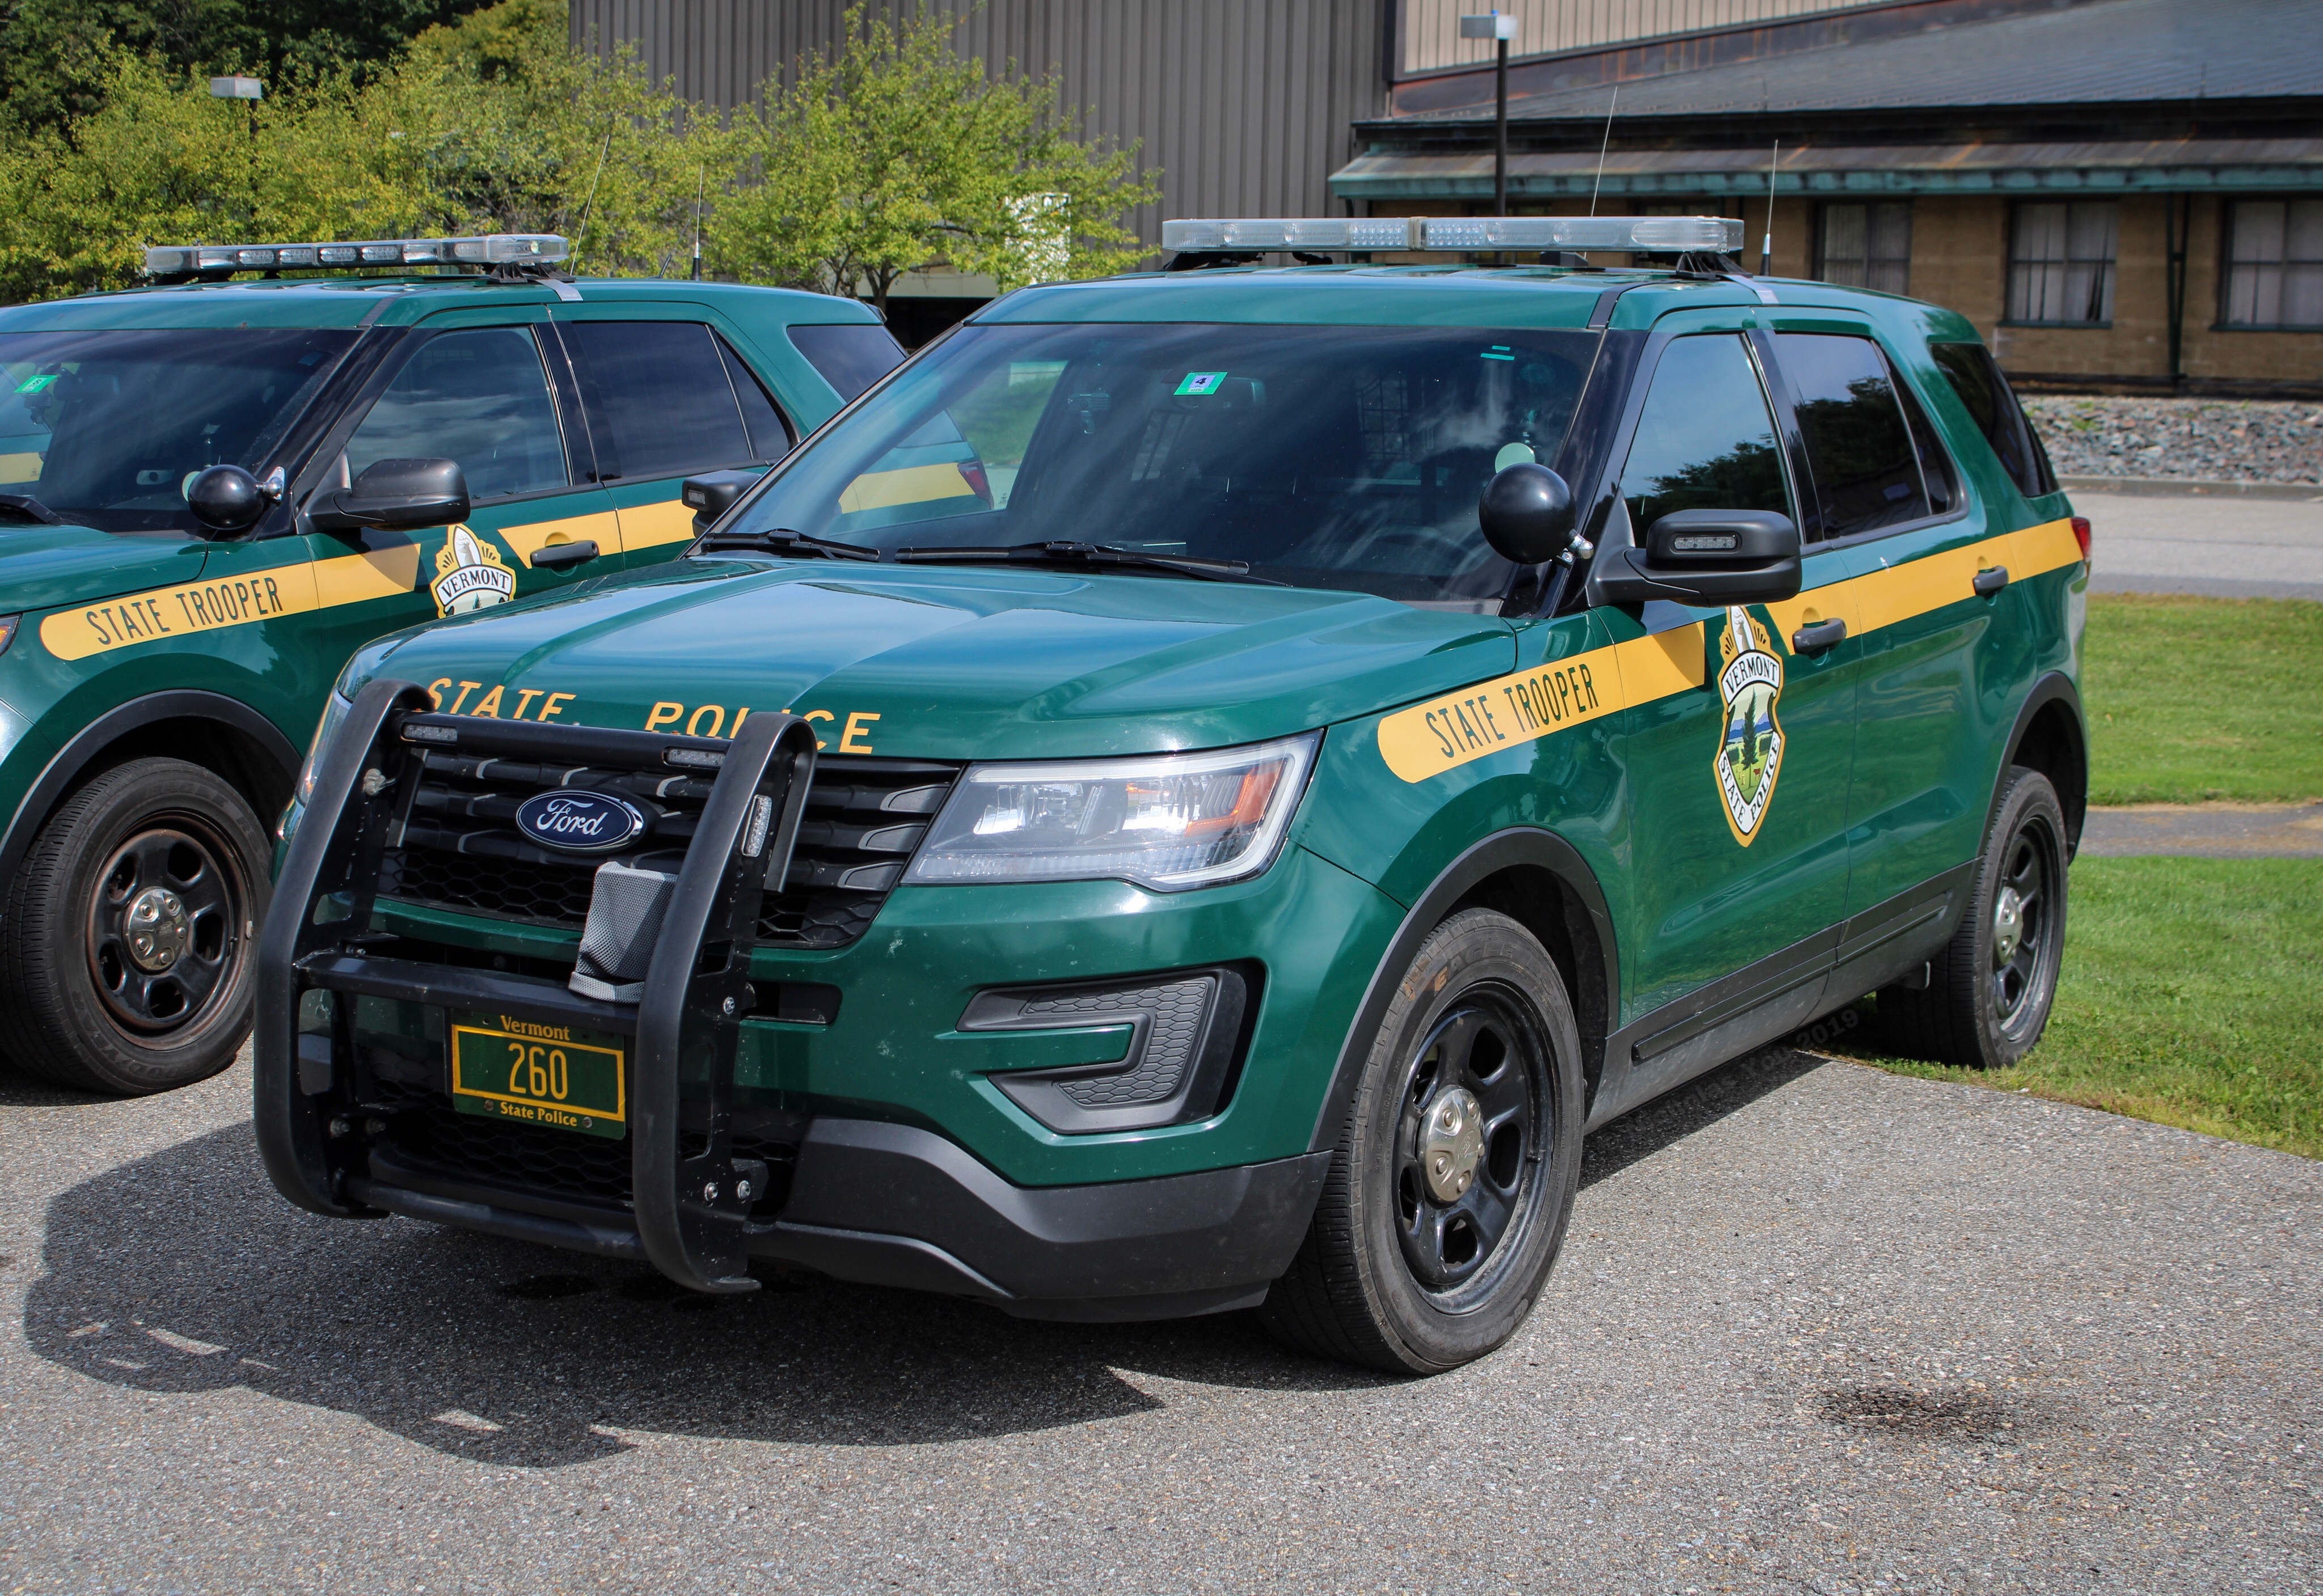 A photo  of Vermont State Police
            Cruiser 260, a 2016-2019 Ford Police Interceptor Utility             taken by Nicholas You